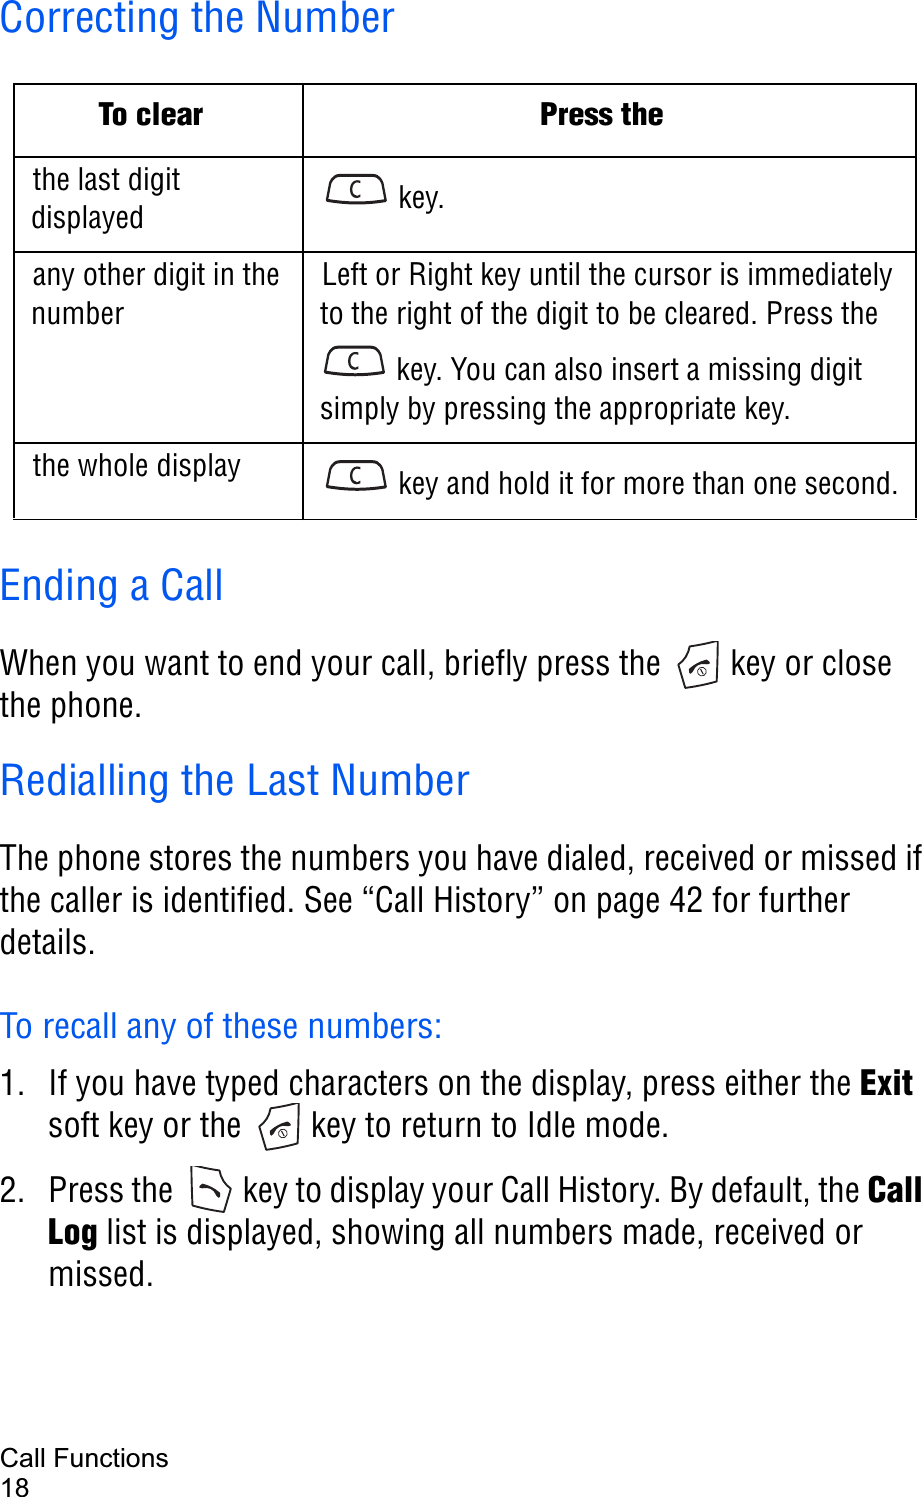 Call Functions18Correcting the NumberEnding a CallWhen you want to end your call, briefly press the   key or close the phone.Redialling the Last NumberThe phone stores the numbers you have dialed, received or missed if the caller is identified. See “Call History” on page 42 for further details.To recall any of these numbers:1. If you have typed characters on the display, press either the Exitsoft key or the   key to return to Idle mode.2. Press the   key to display your Call History. By default, the CallLog list is displayed, showing all numbers made, received or missed.To clear Press thethe last digit displayed  key. any other digit in the numberLeft or Right key until the cursor is immediately to the right of the digit to be cleared. Press the  key. You can also insert a missing digit simply by pressing the appropriate key.the whole display  key and hold it for more than one second.